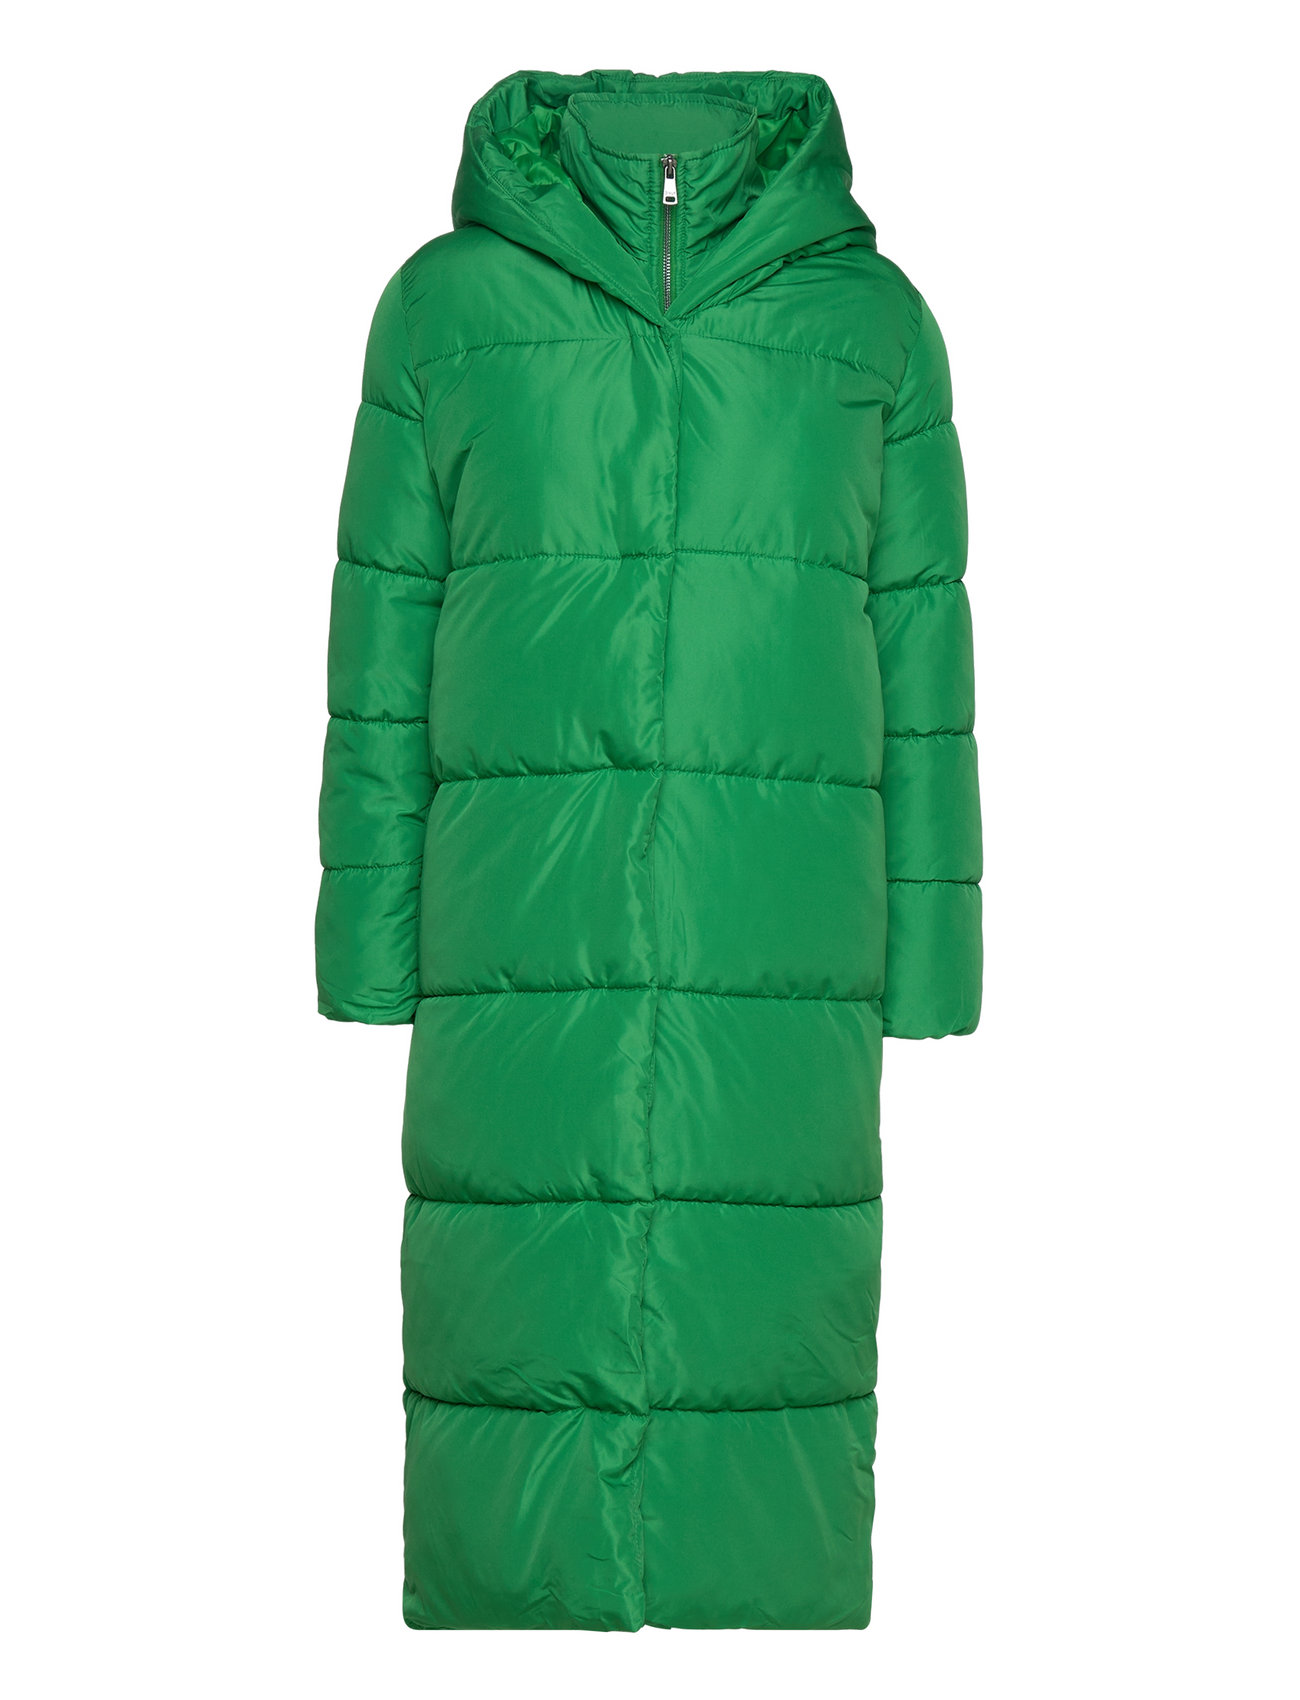 ONLY Onlamy X Long Puffer Padded at online delivery Otw from easy - Coats Buy €. 89.99 Boozt.com. Coat returns and ONLY Fast